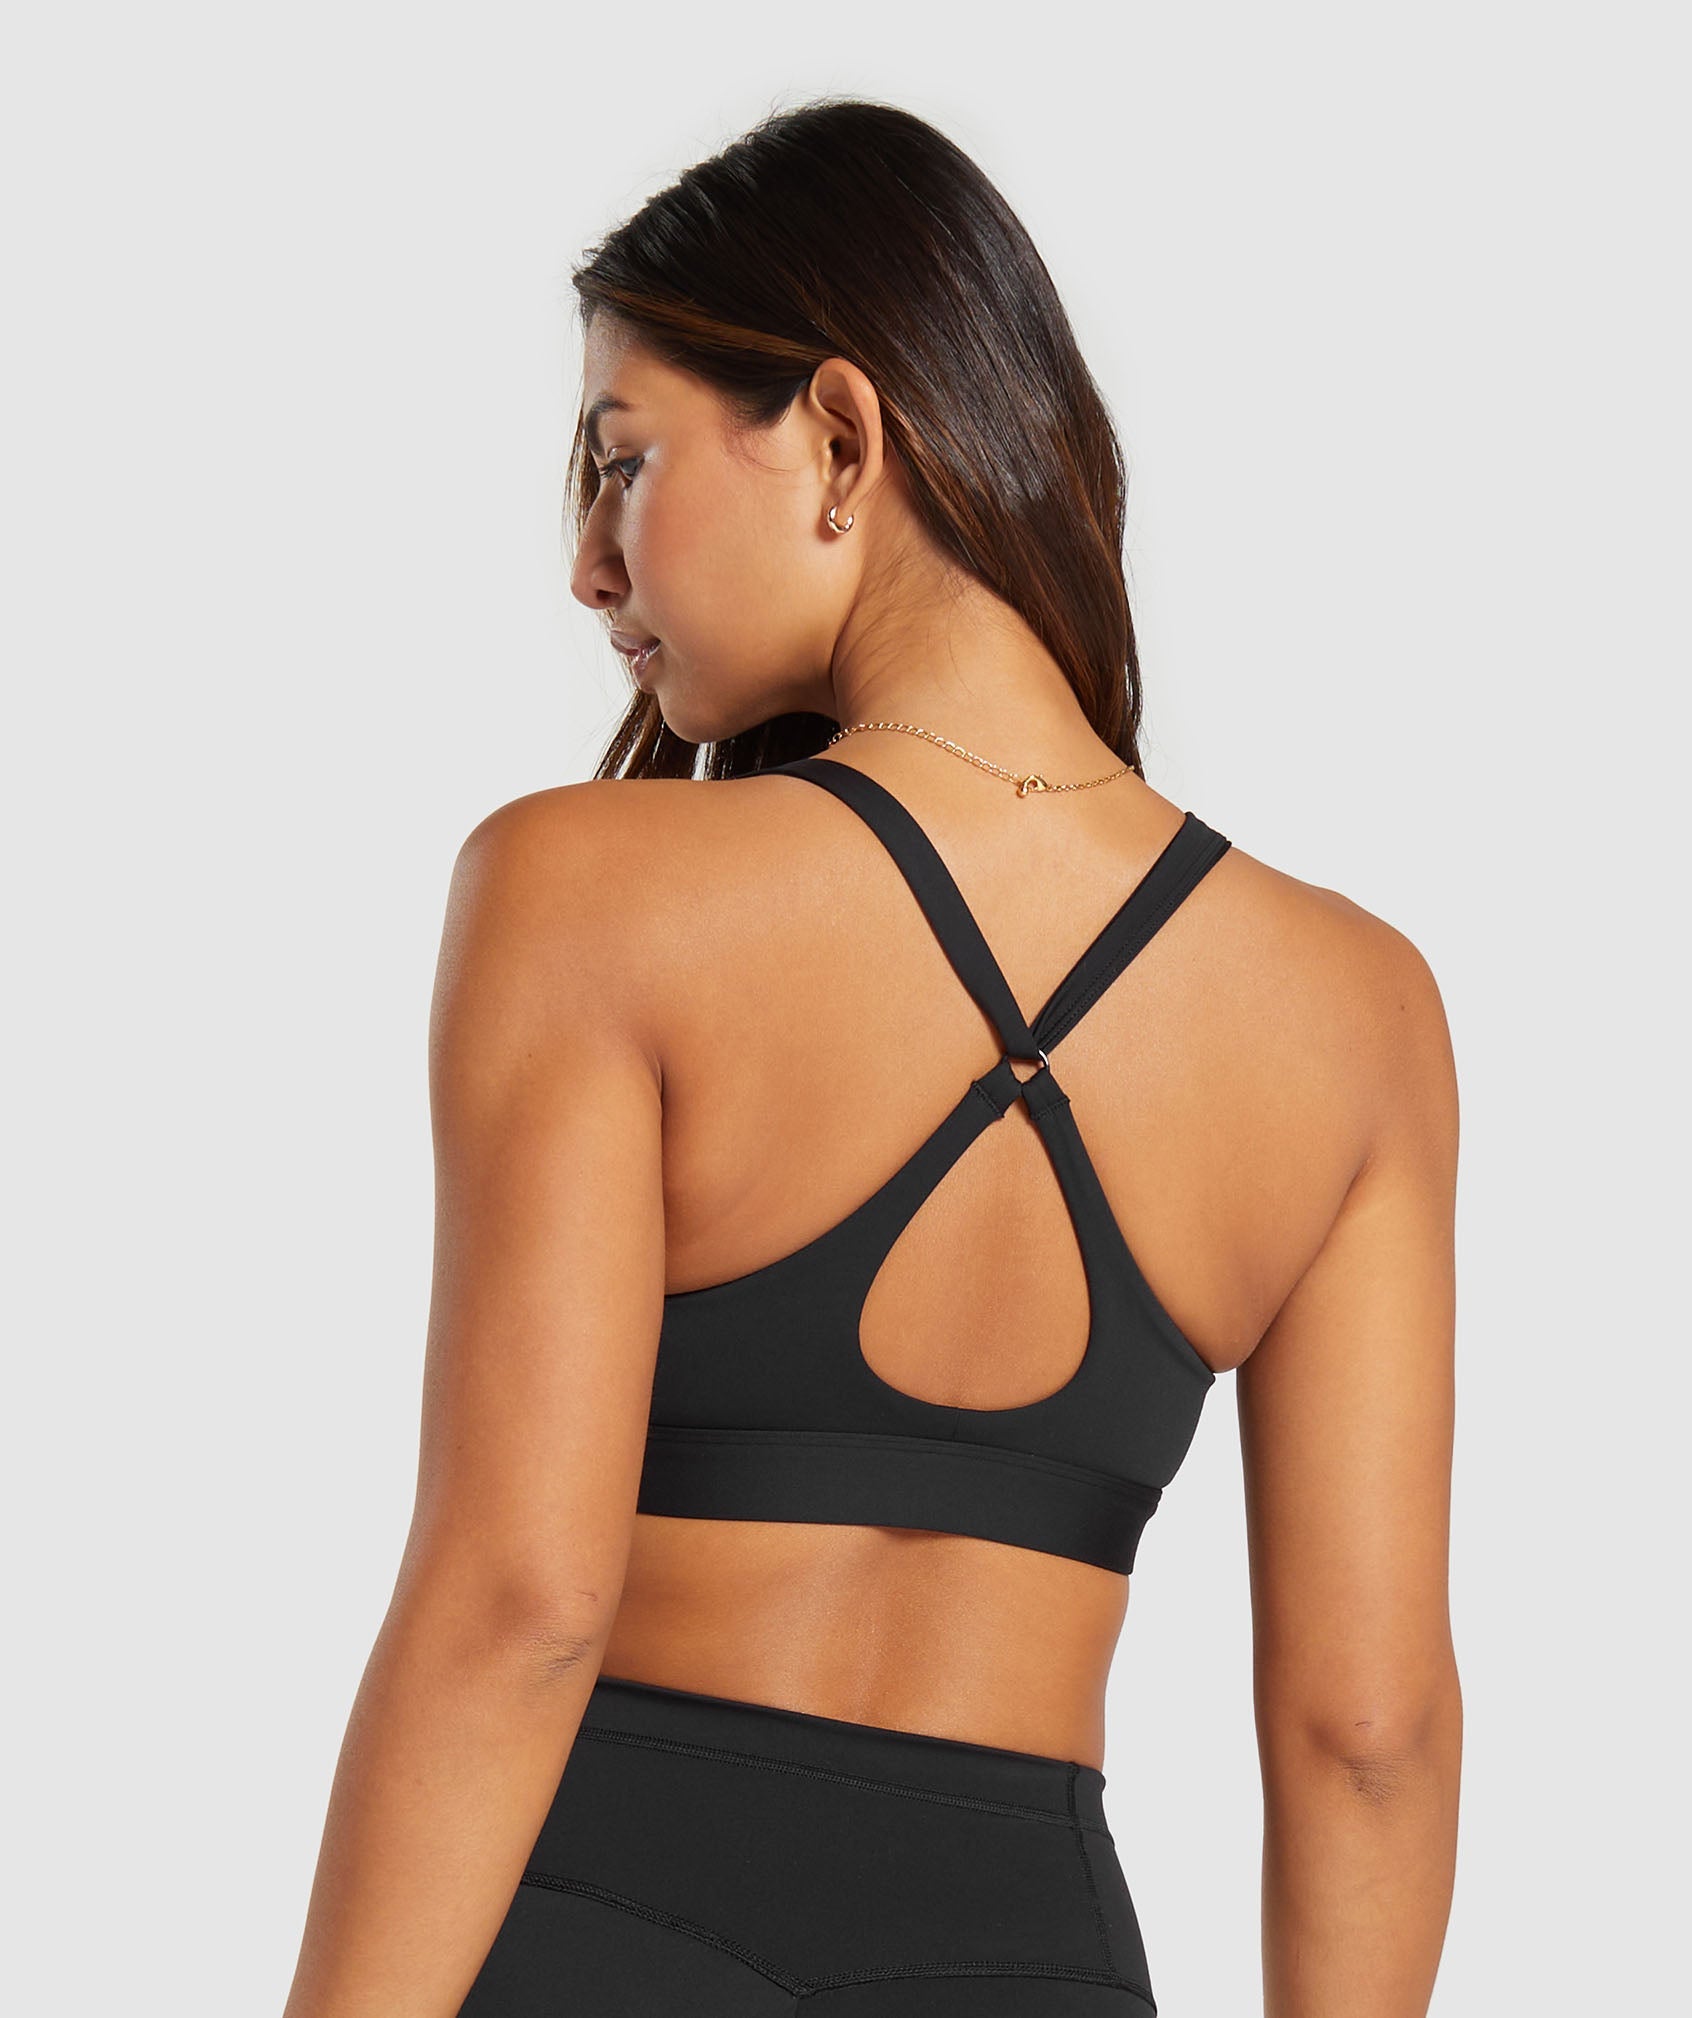 The Peekaboo Bra Is Back, & Here's How To Style The Trend